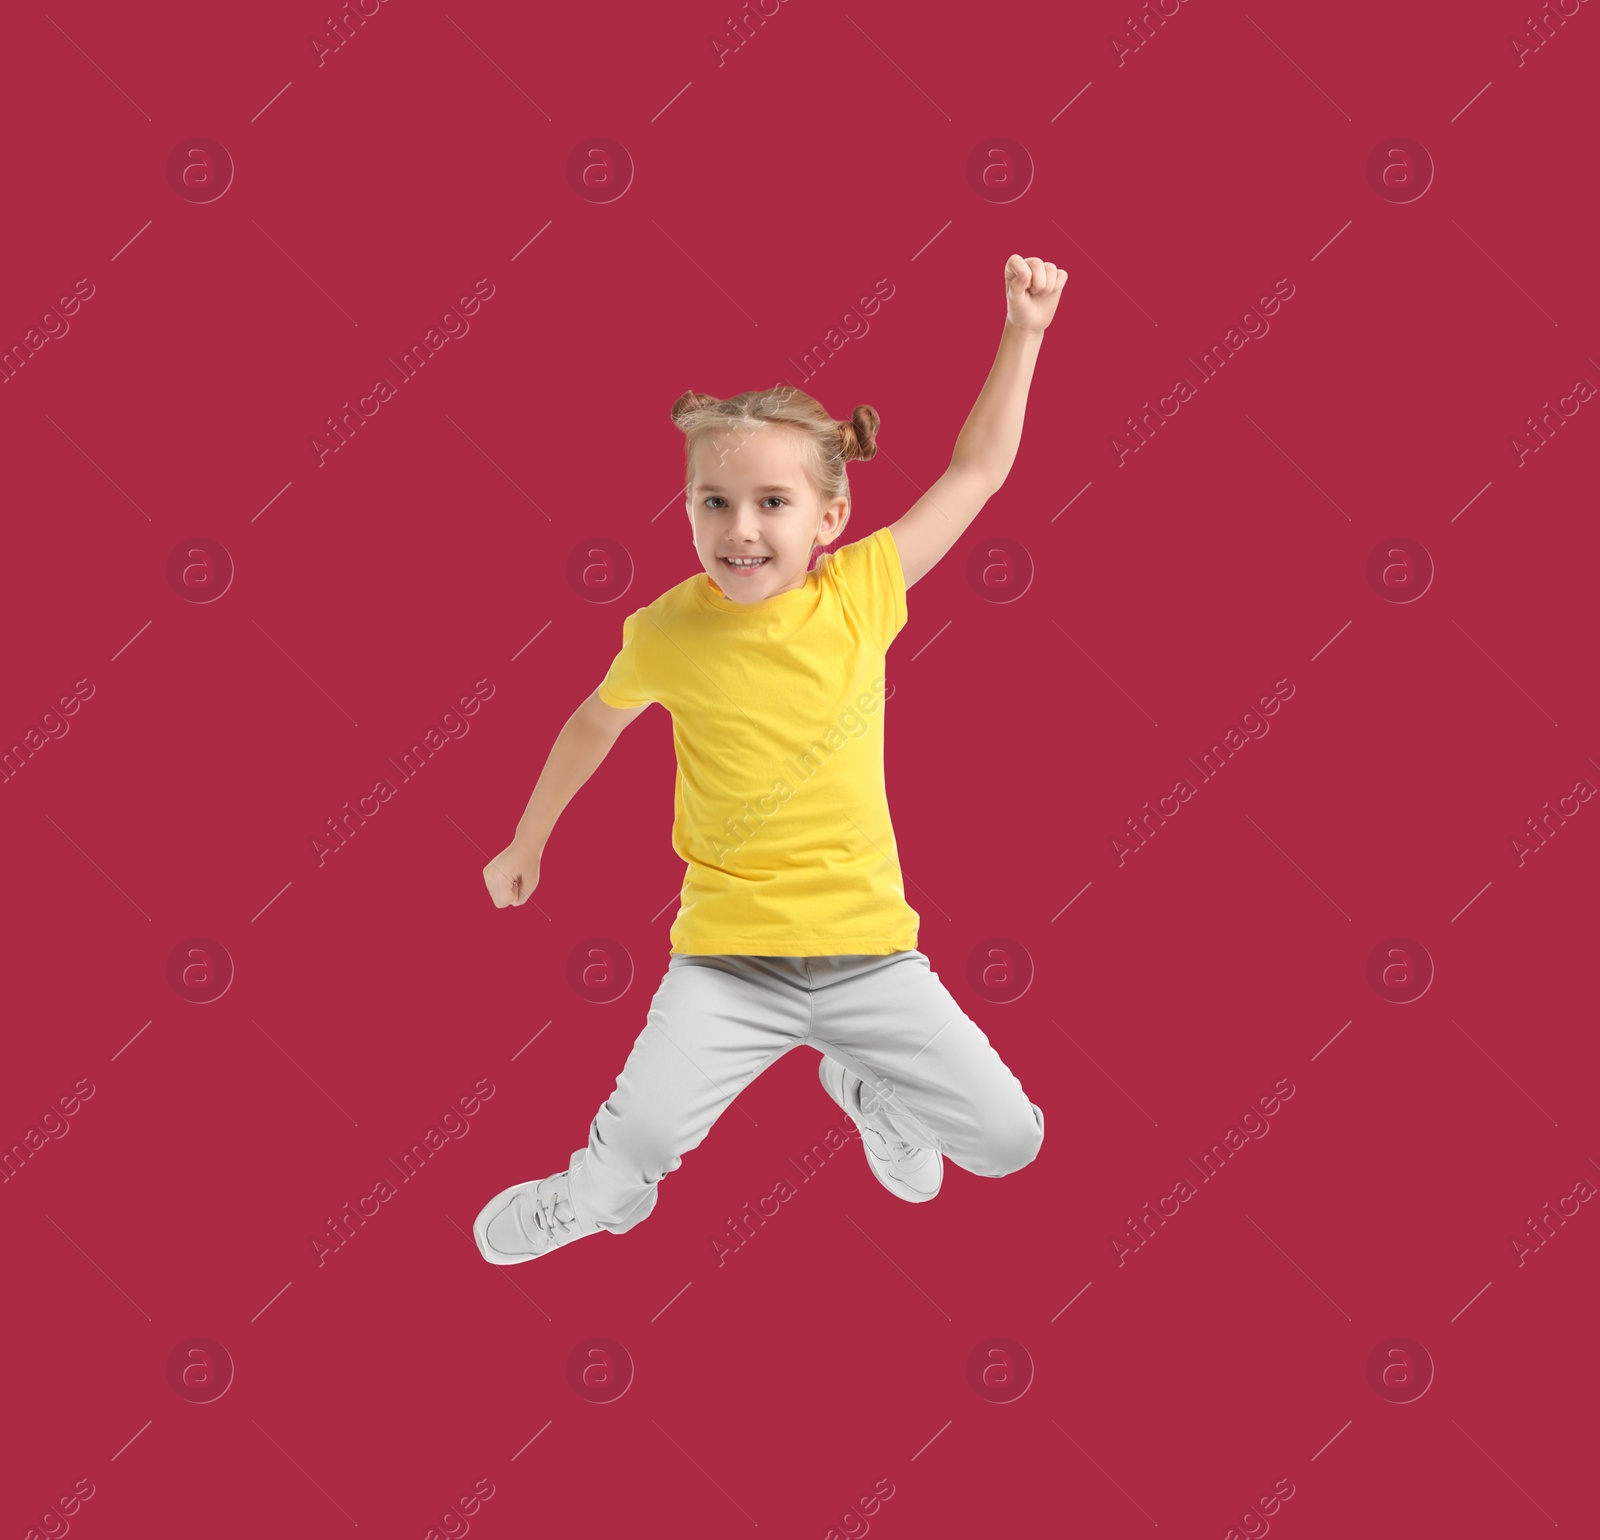 Image of Happy cute girl jumping on red background